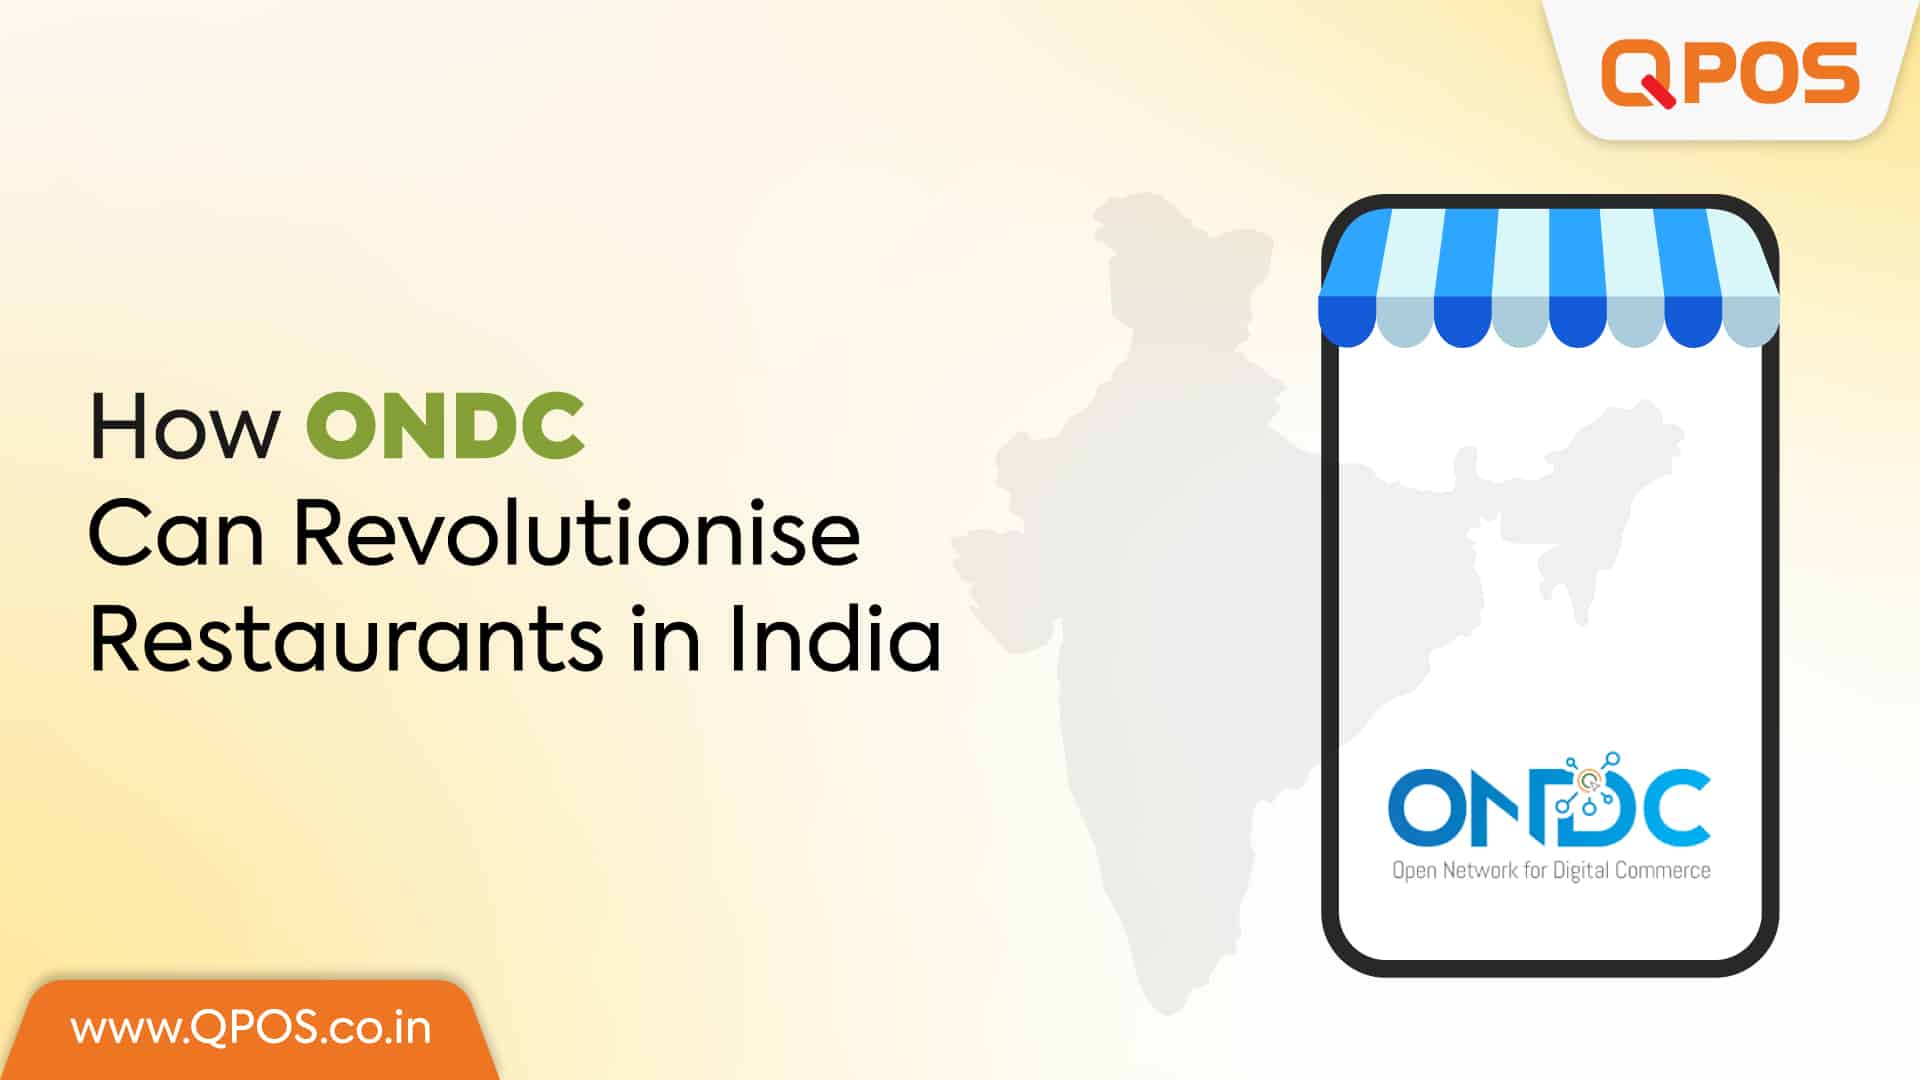 QPOS-ONDC is opening new doors for restaurants. With our guide, explore how it is reshaping the restaurant industry in India.